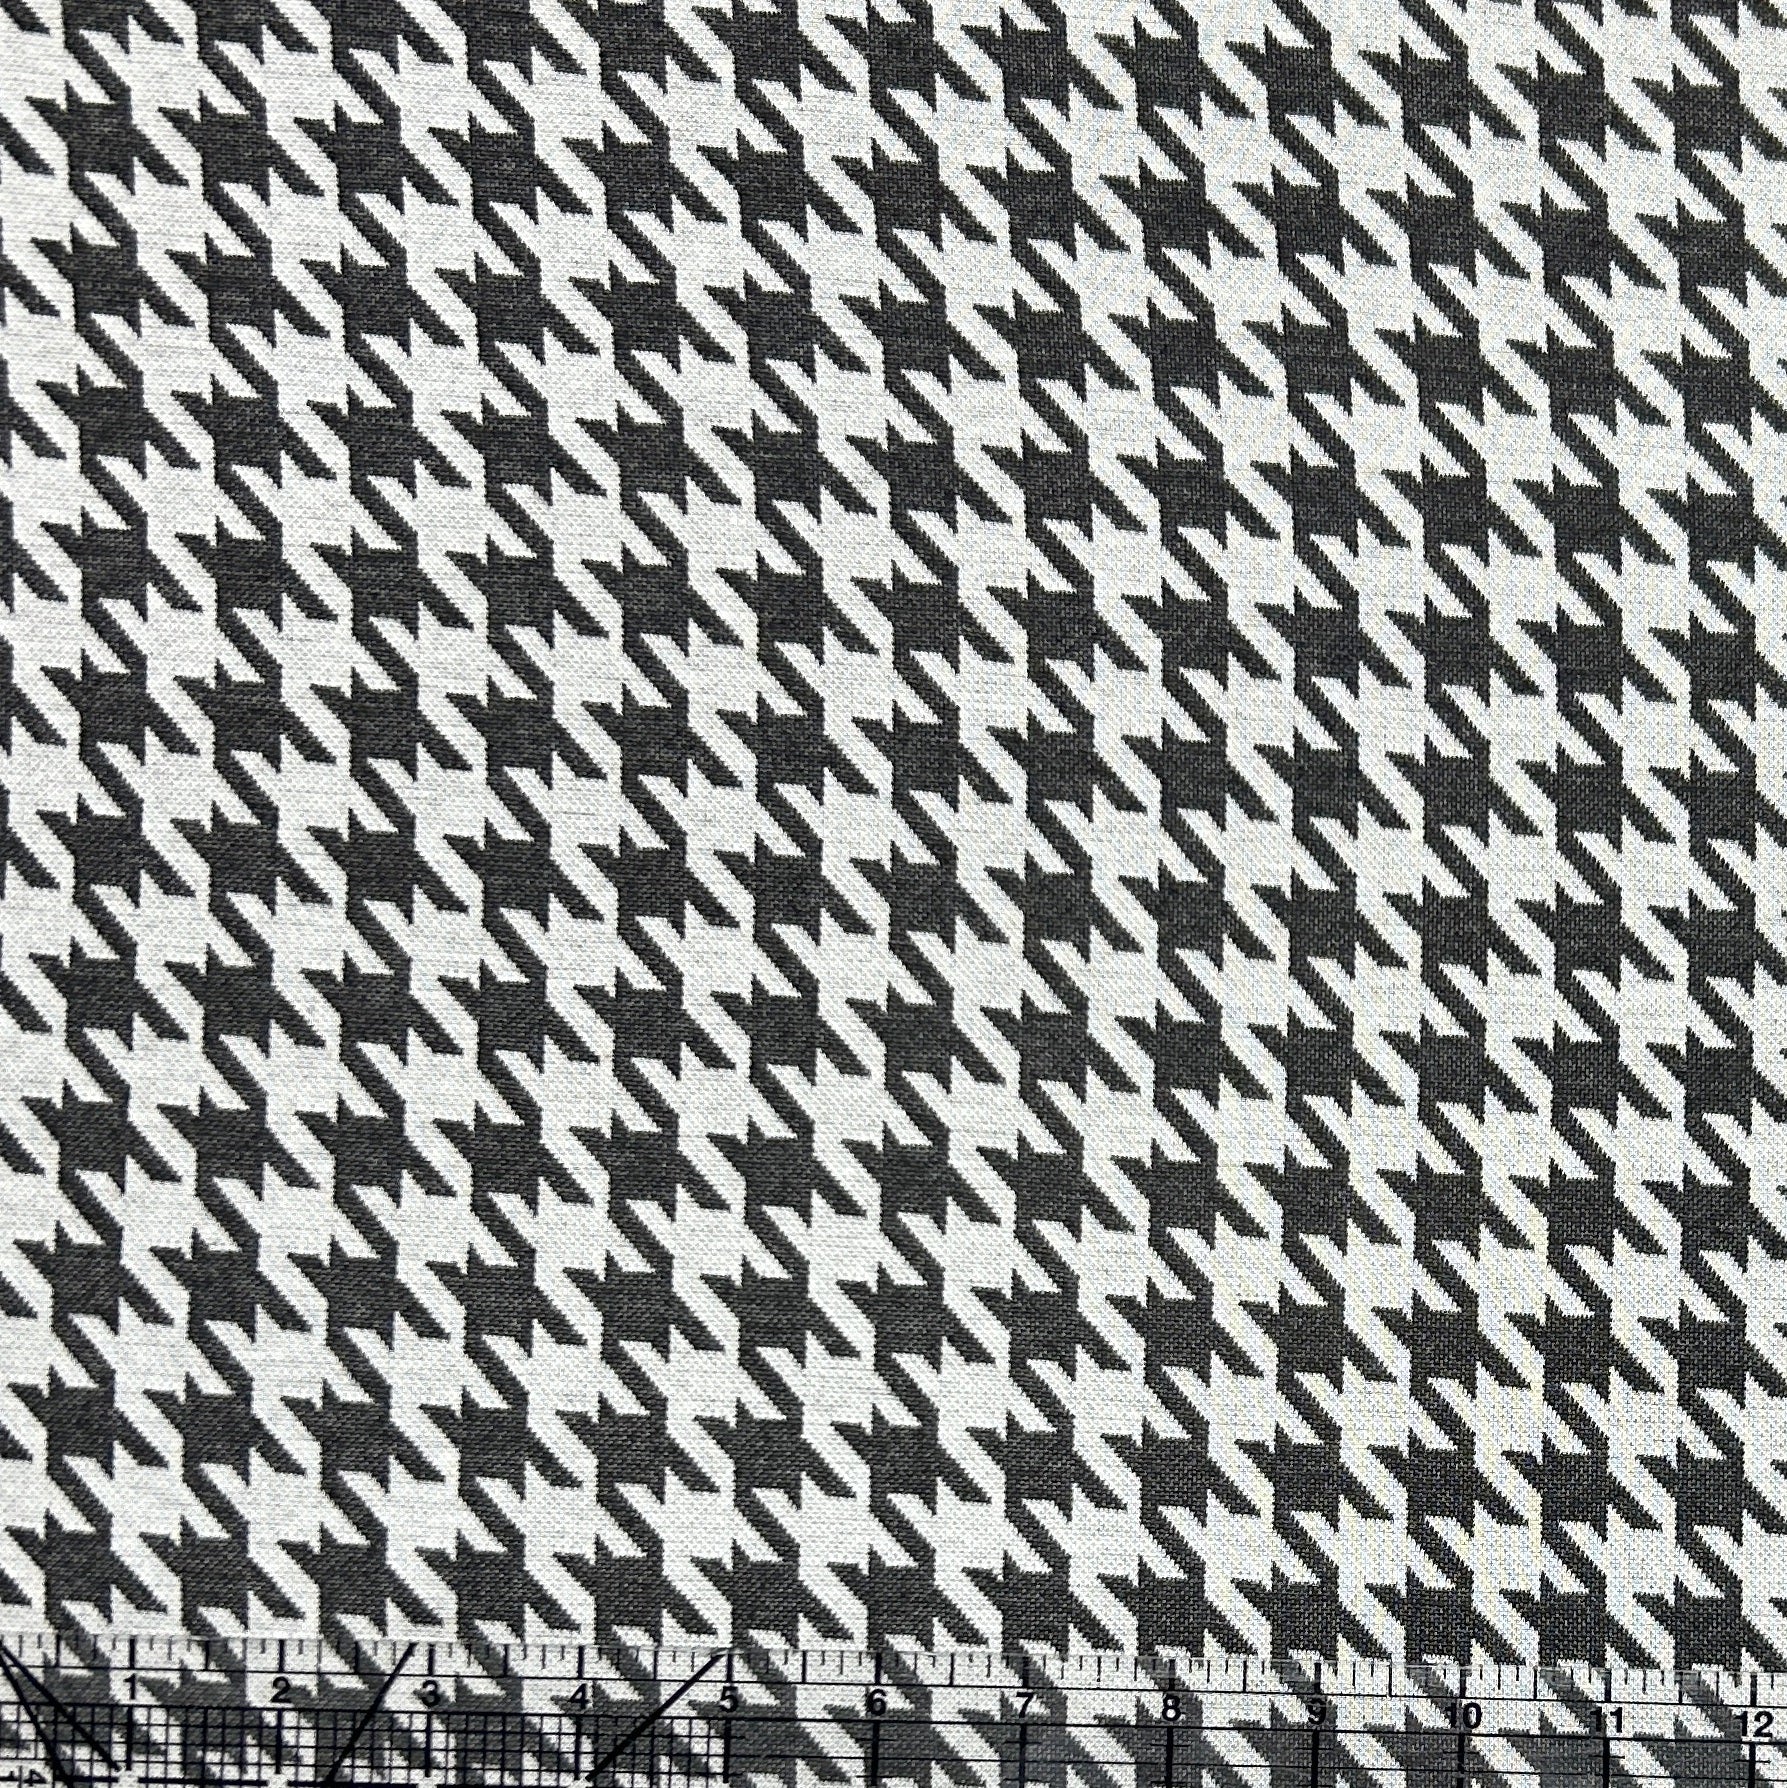 Black and White Houndstooth Jacquard Double Knit Fabric